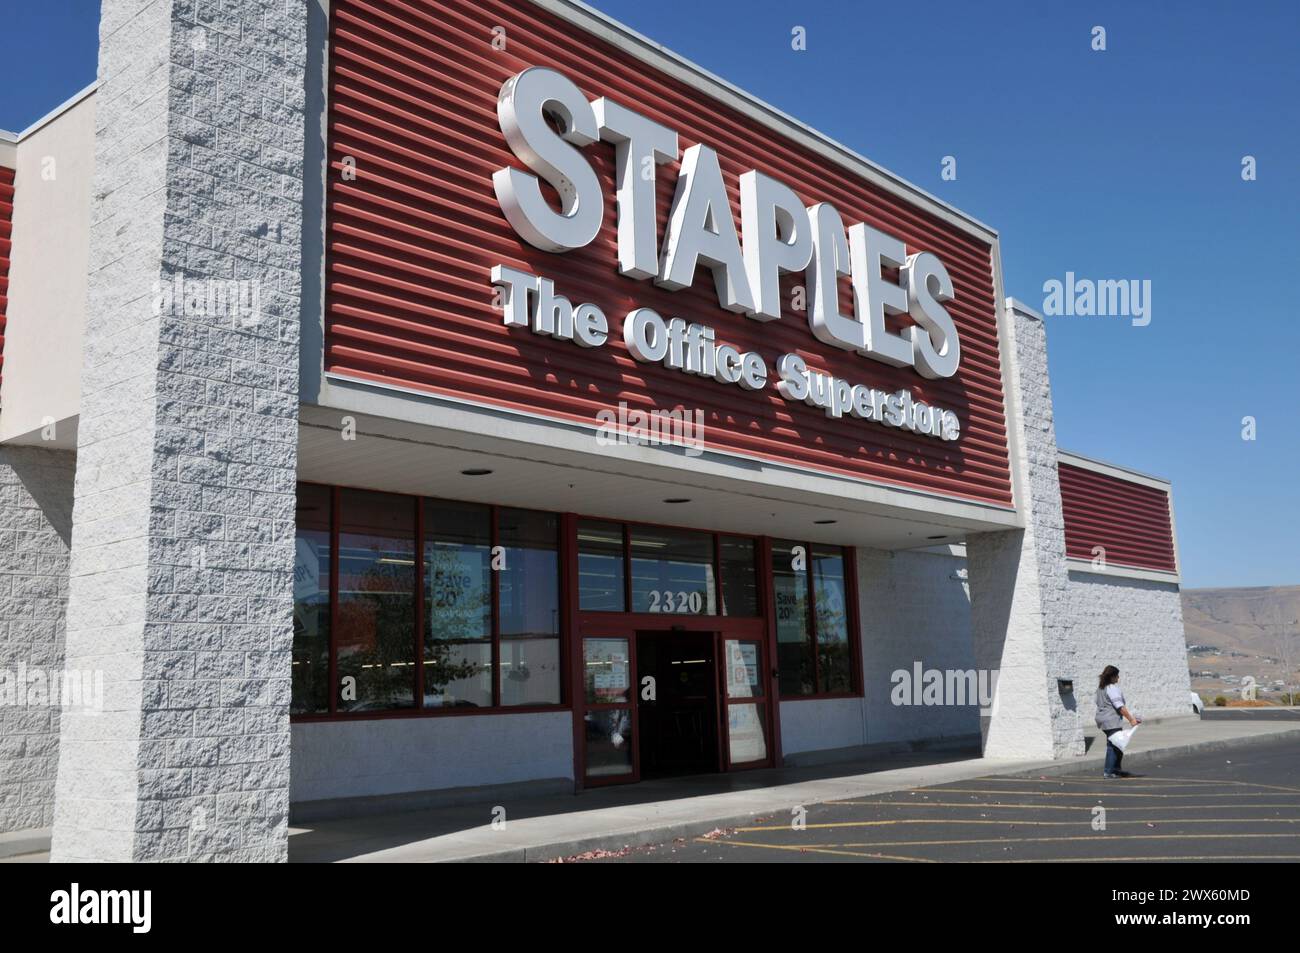 lewiston /Idaho /USA/ 04.Septeber 2019/Stamples the office superstore in Lewiston Idaho United states of america. (Photo..Francis Dean / Deanpictures). Stock Photo